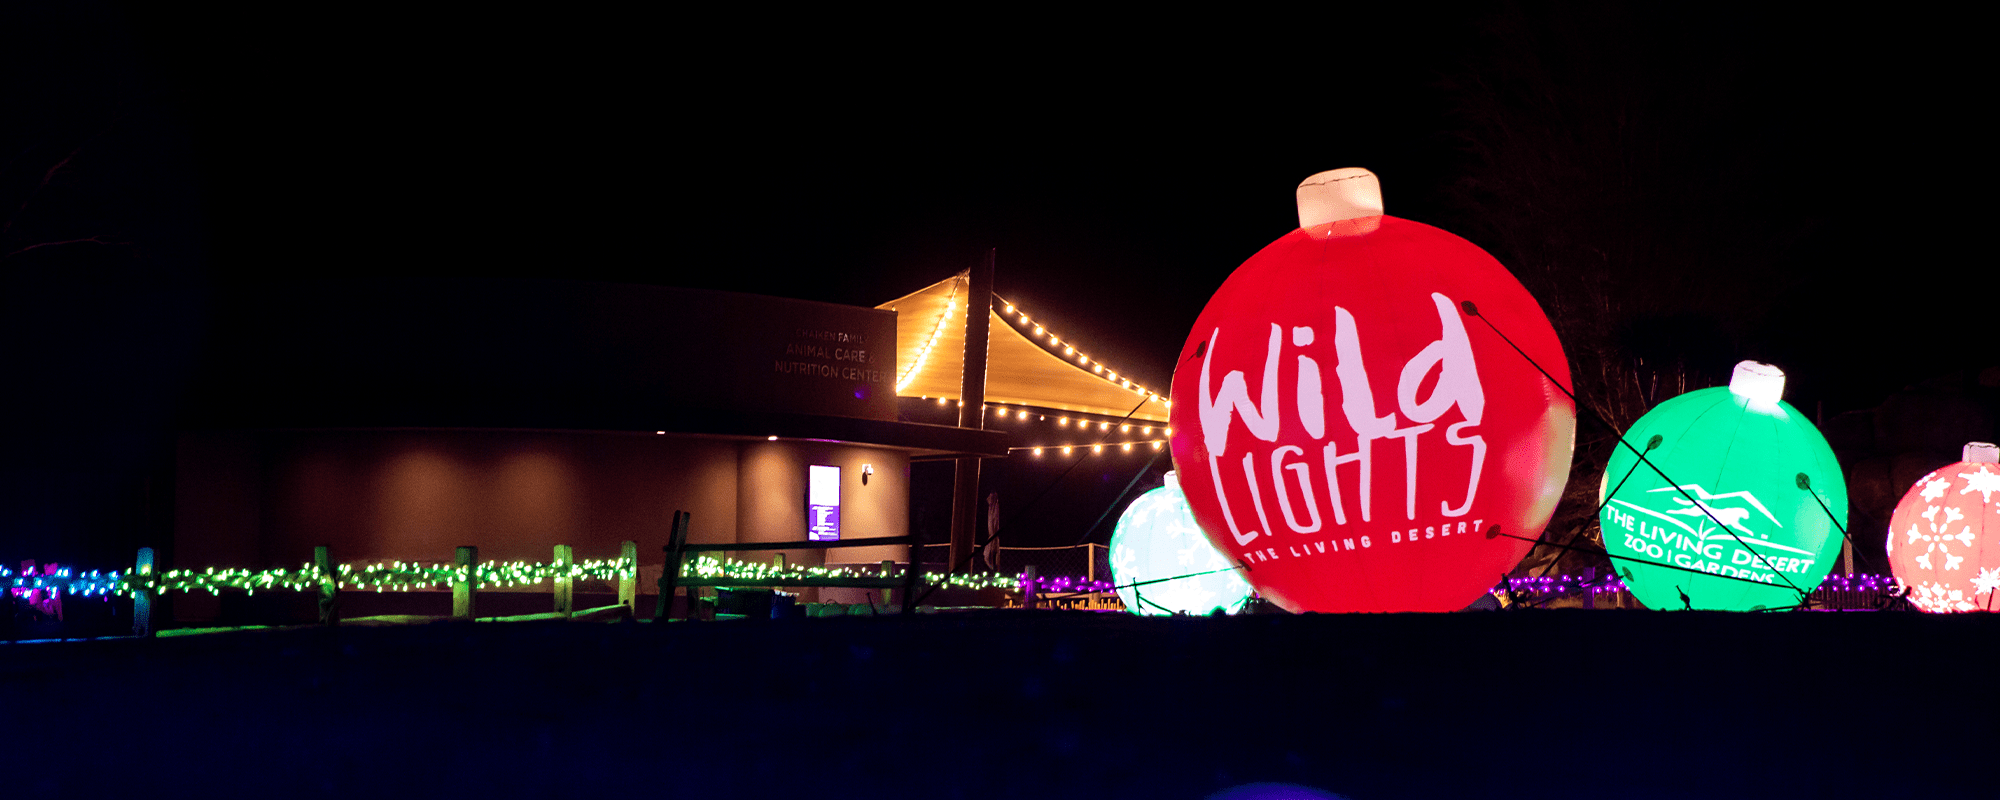 WildLights is an annual, signature event of The Living Desert Zoo and Gardens.